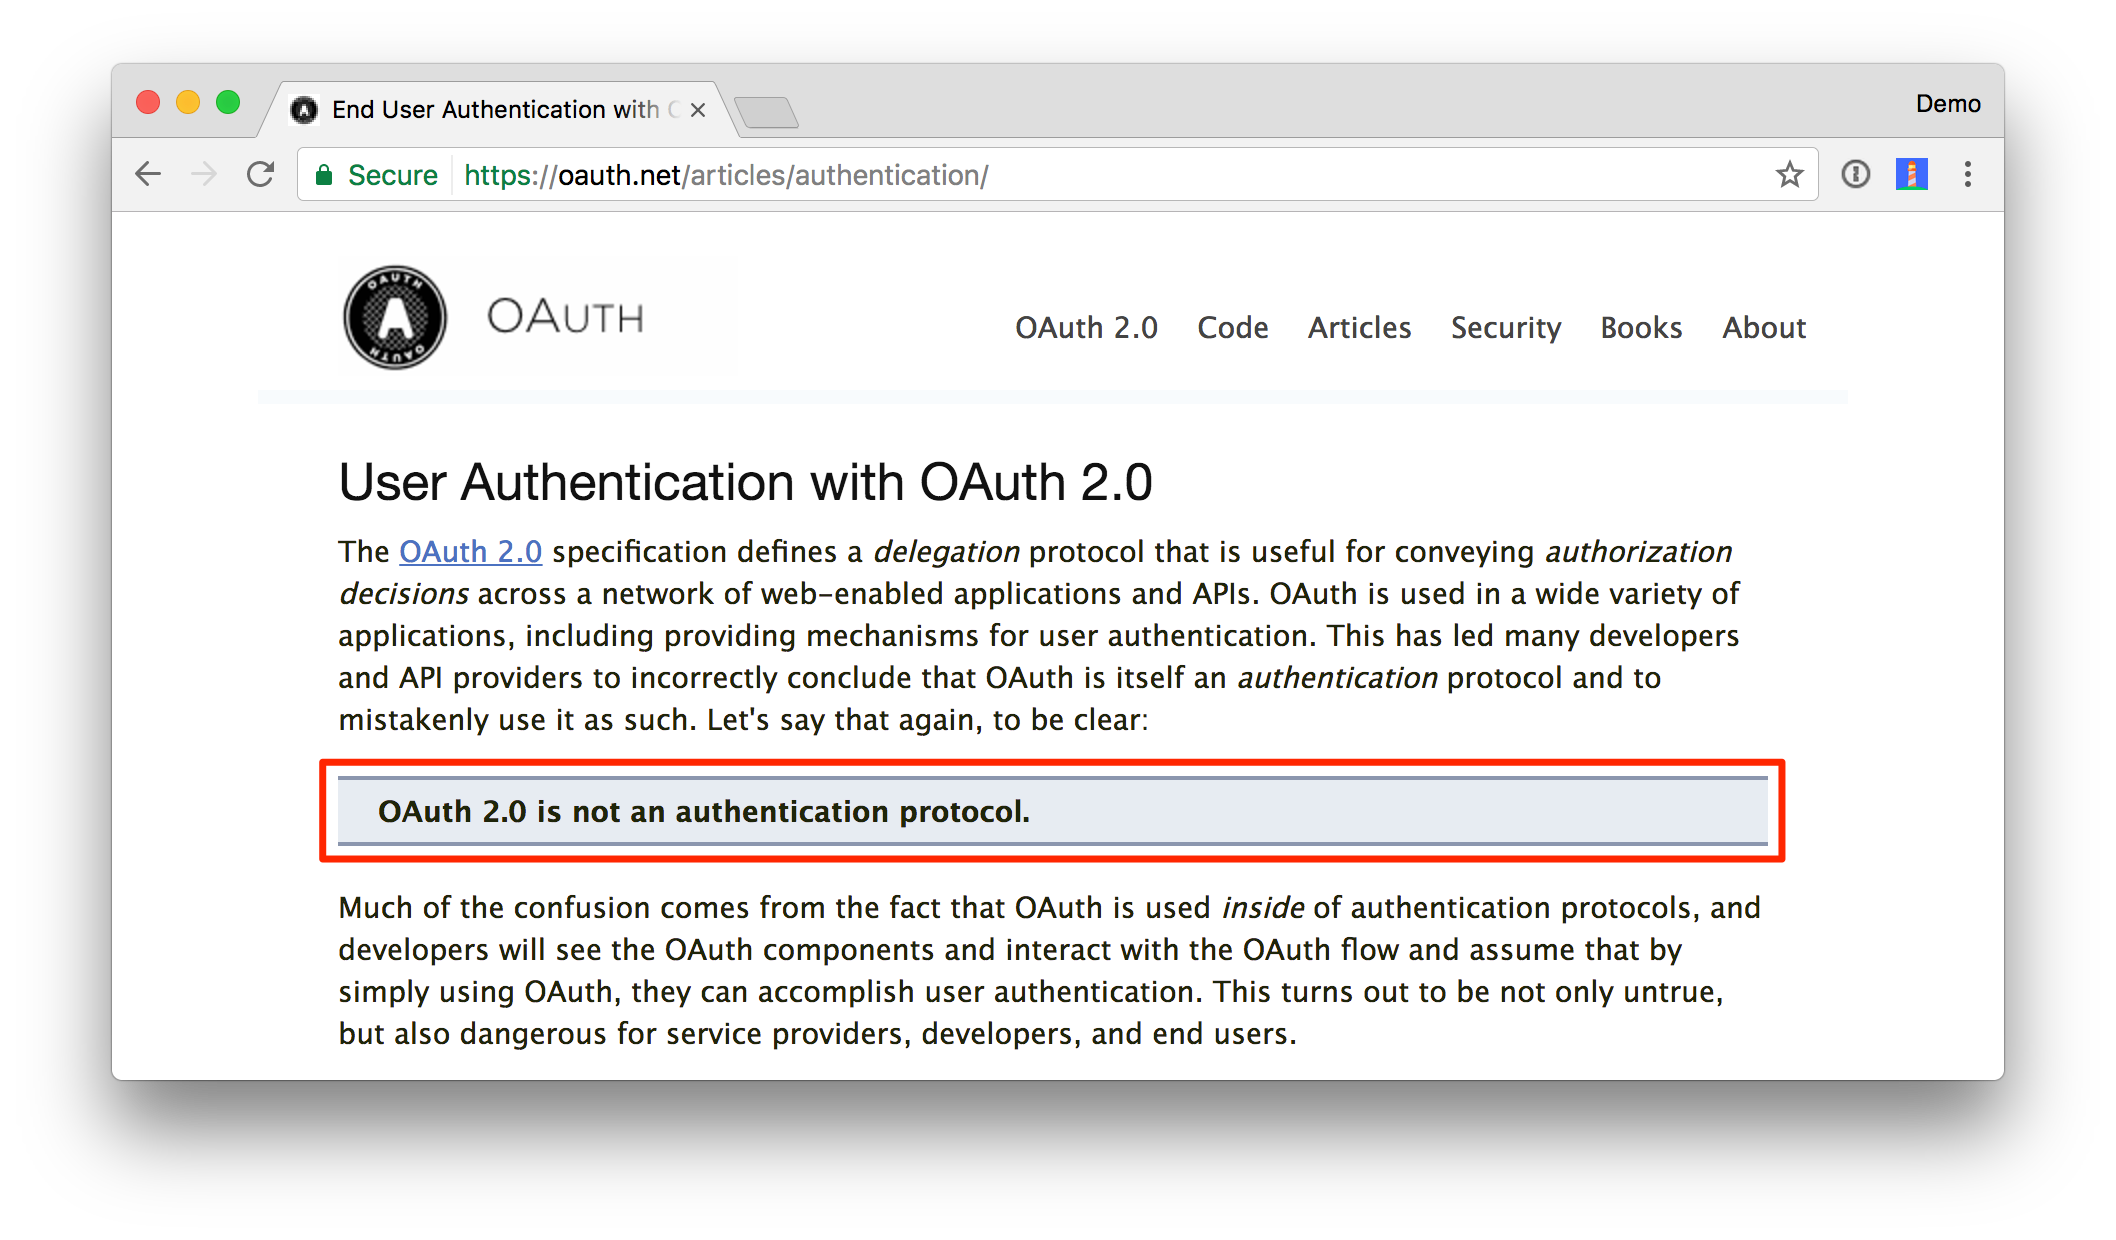 OAuth 2.0 is not an authentication protocol